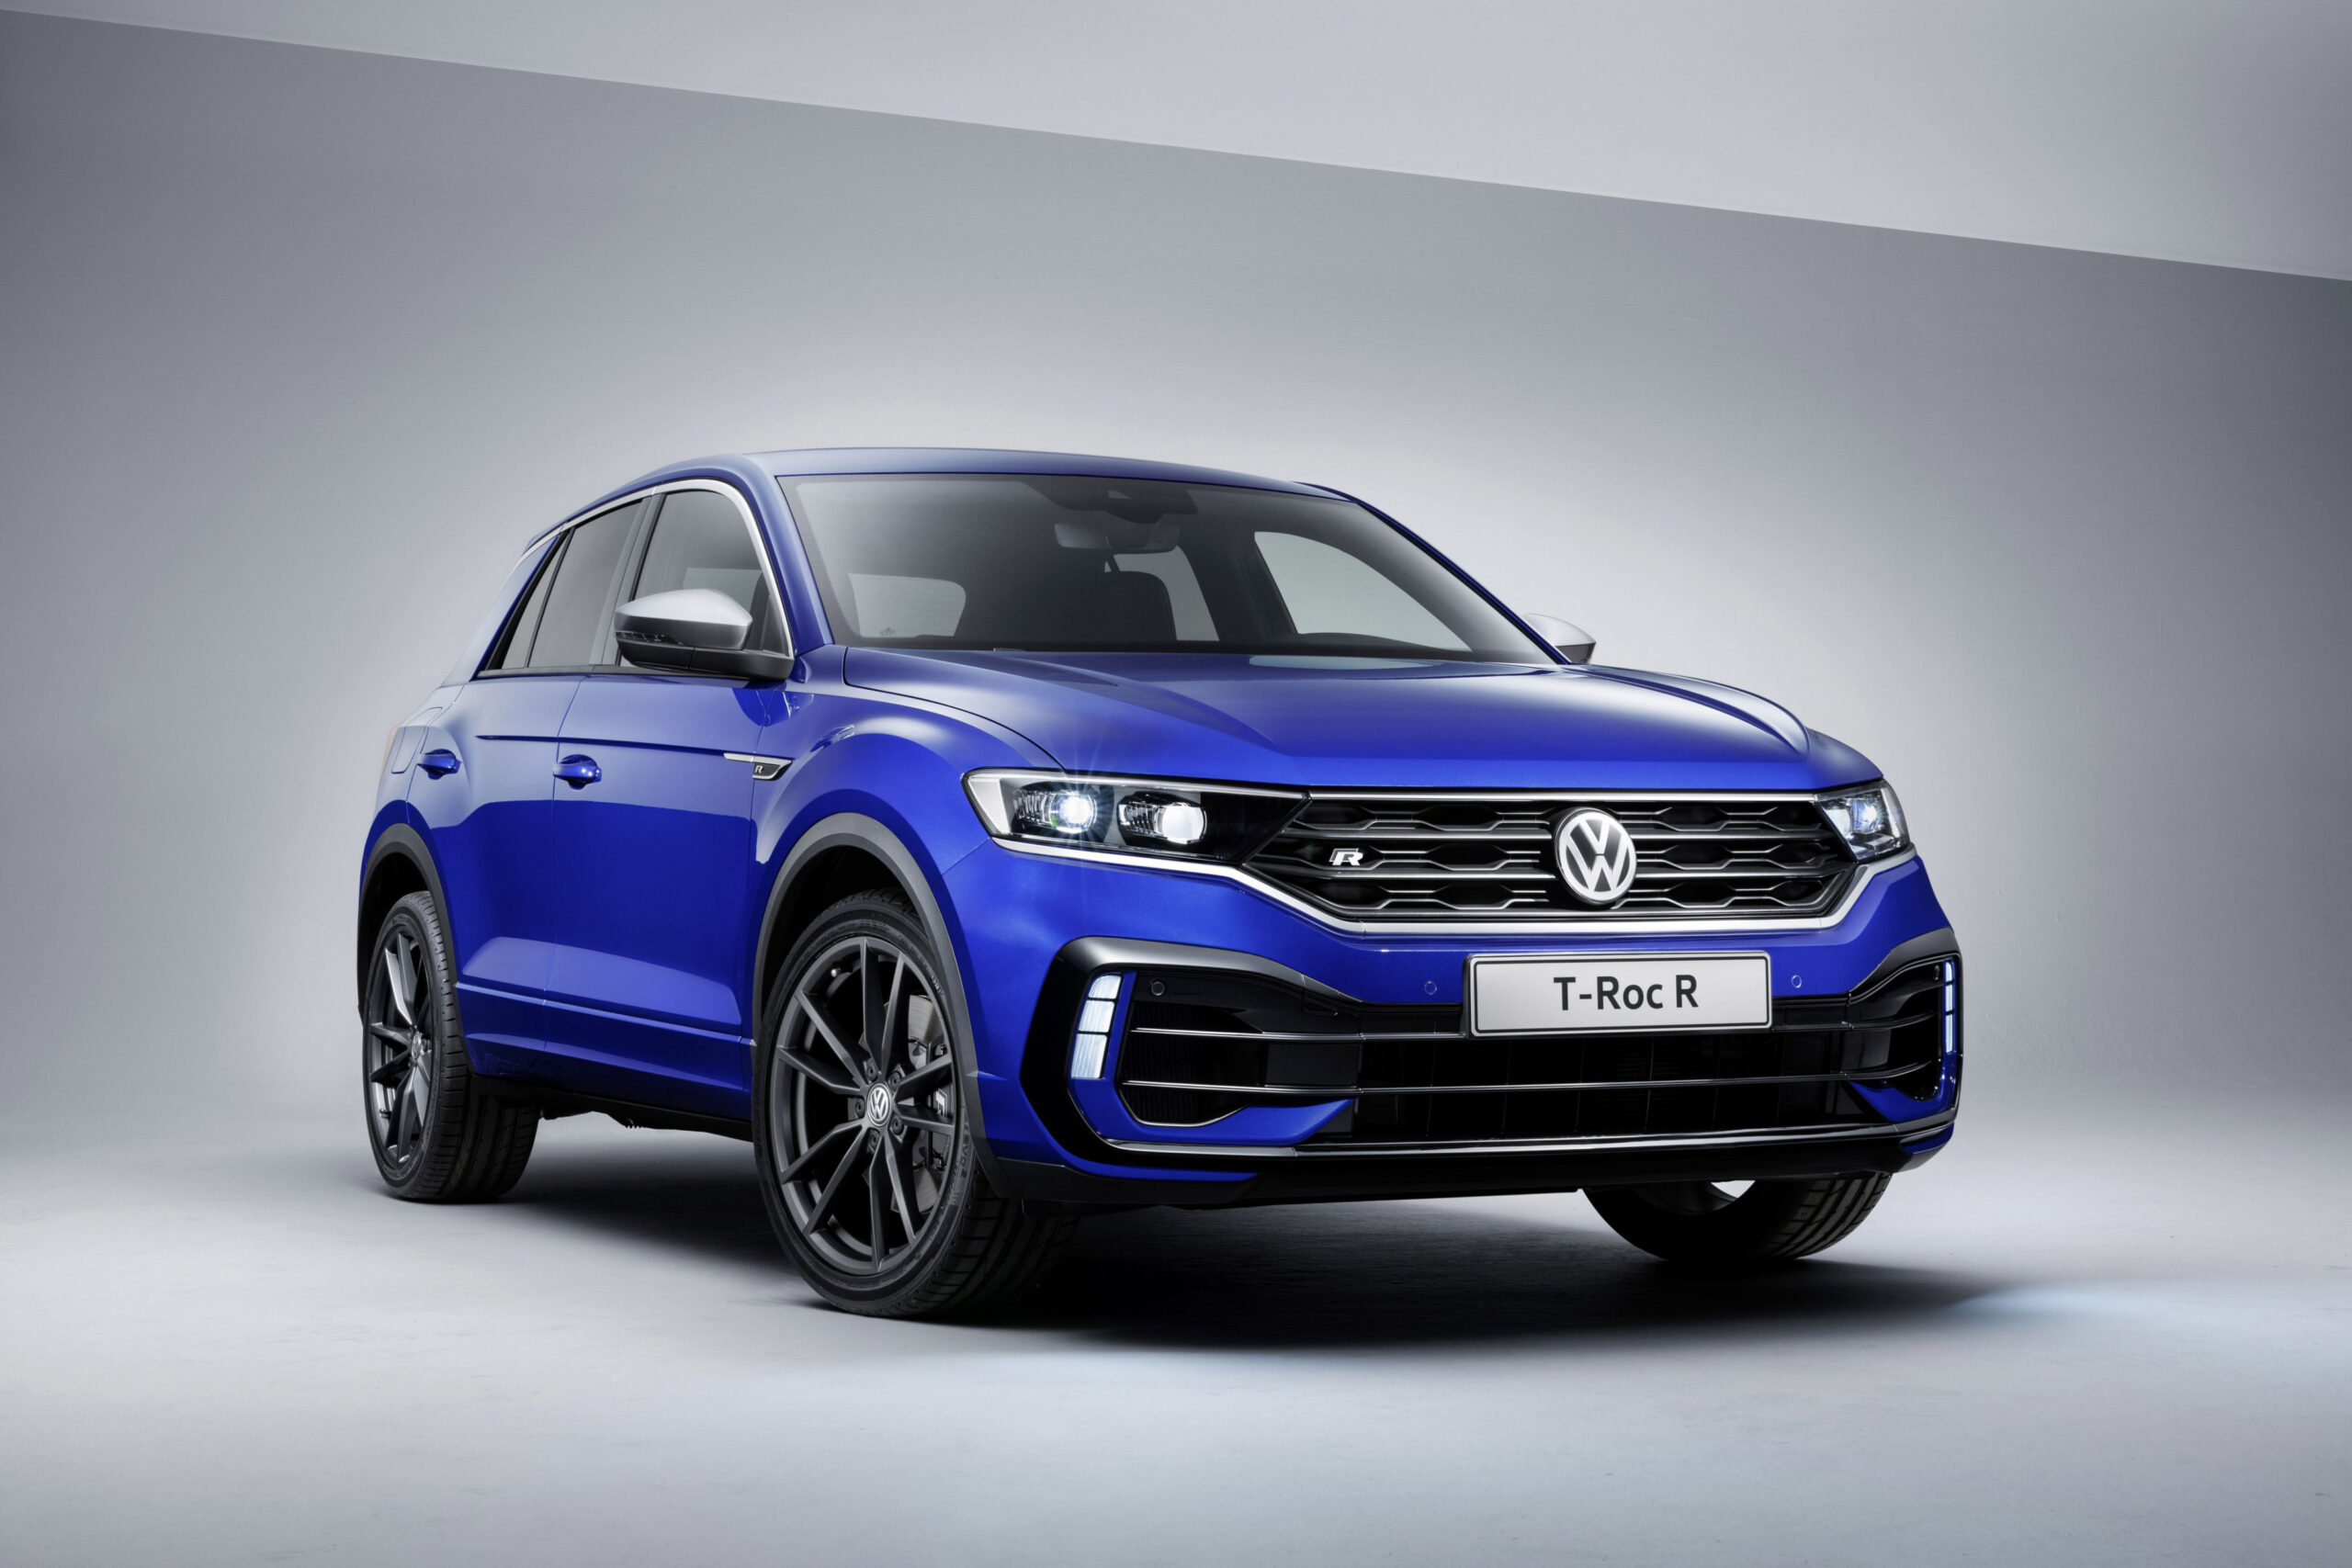 Release Date and Concept vw t-roc